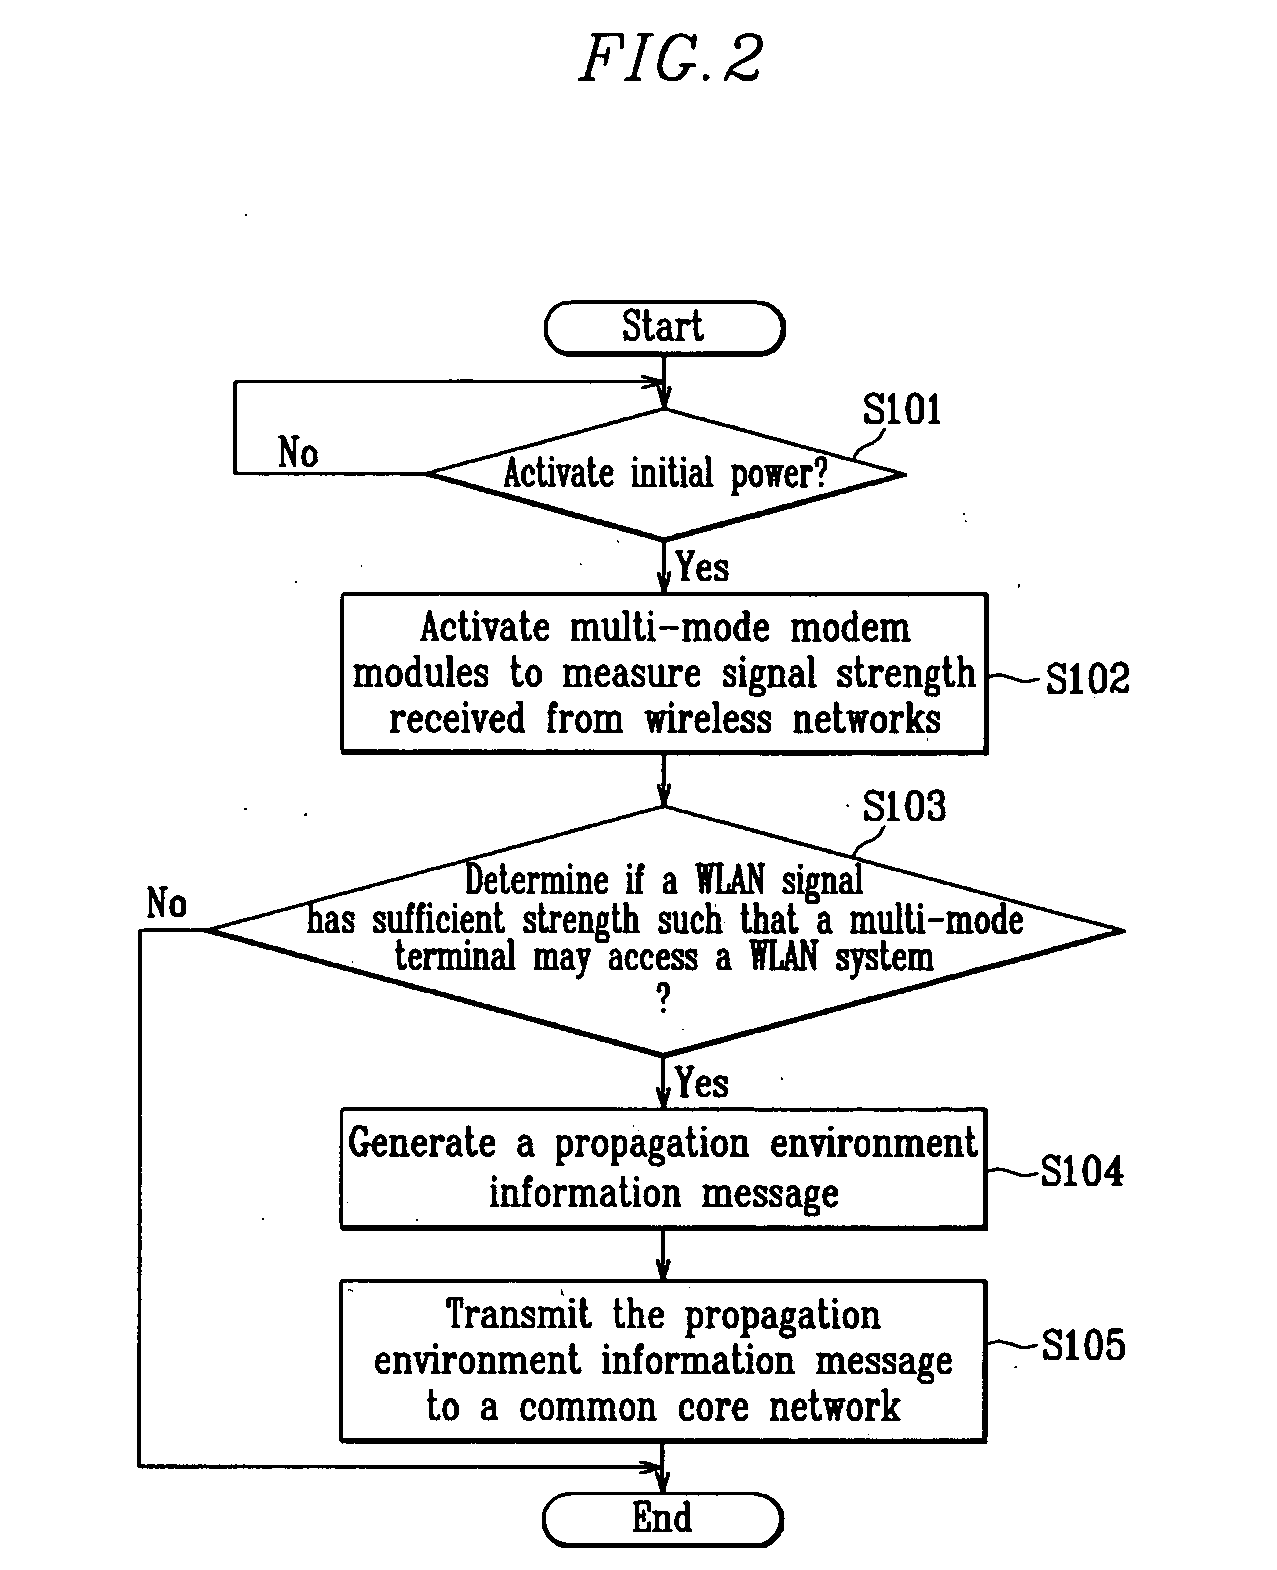 Method for discovering wireless network for inter-system handover, multi-mode terminal unit and inter-working service server using the method